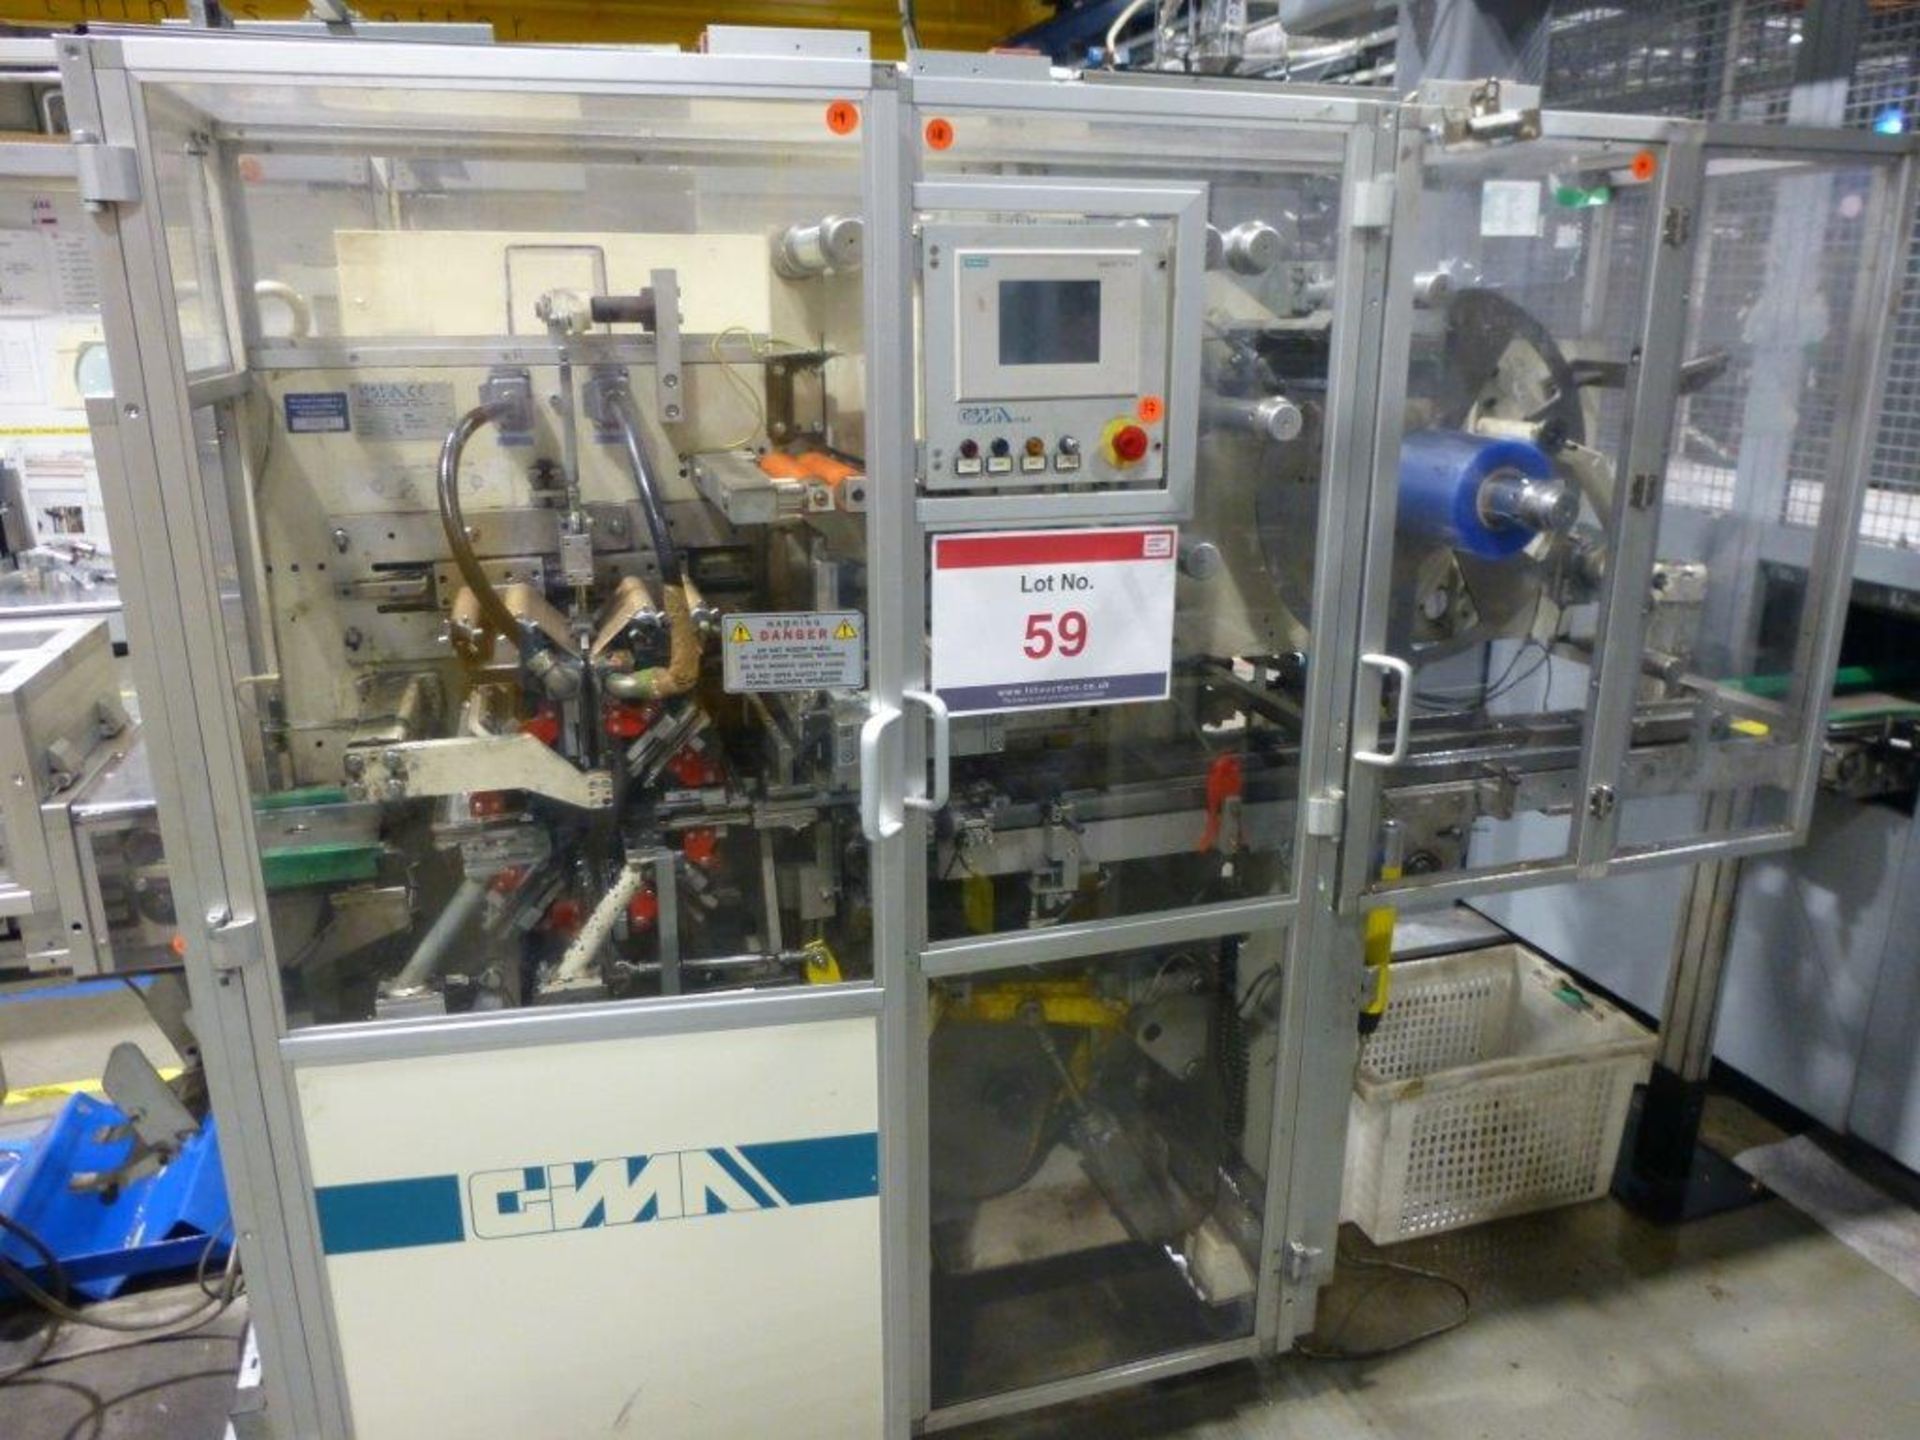 GIMA Type 884 DVD CNC Rotary Thermal Welding Machine Serial No. 88455FO (2003) with turnover unit. - Image 2 of 5